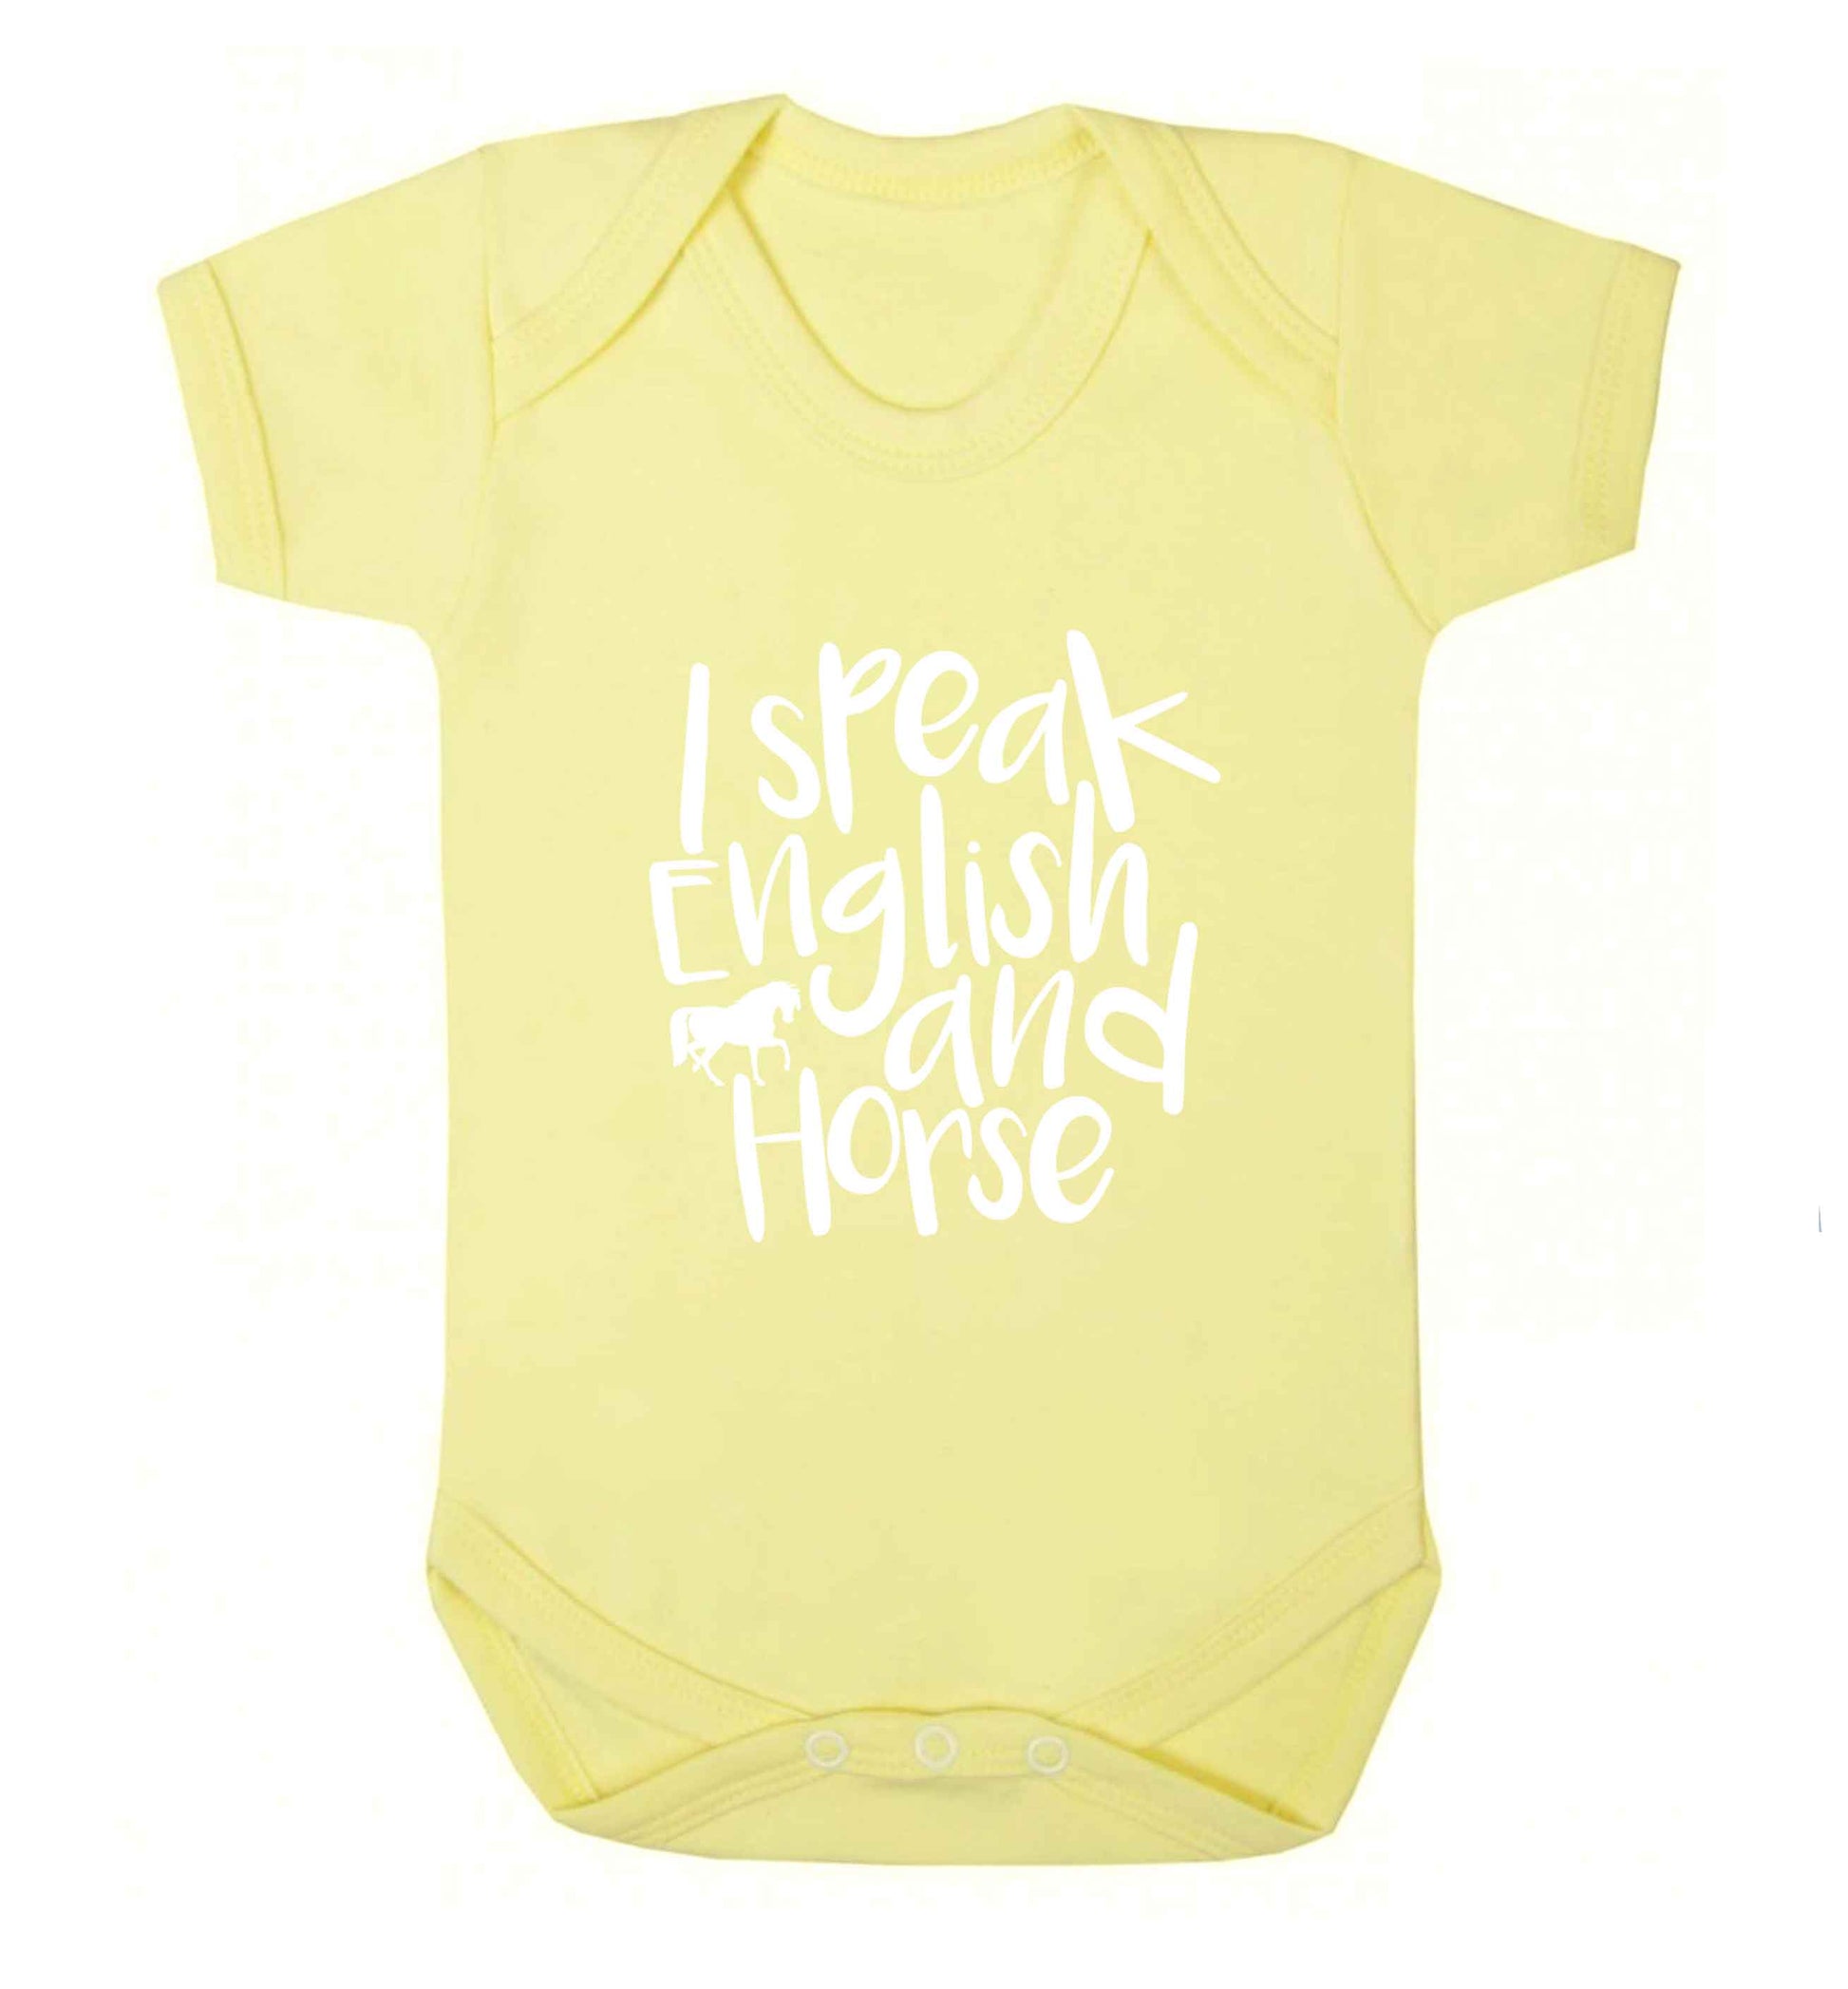 I speak English and horse baby vest pale yellow 18-24 months